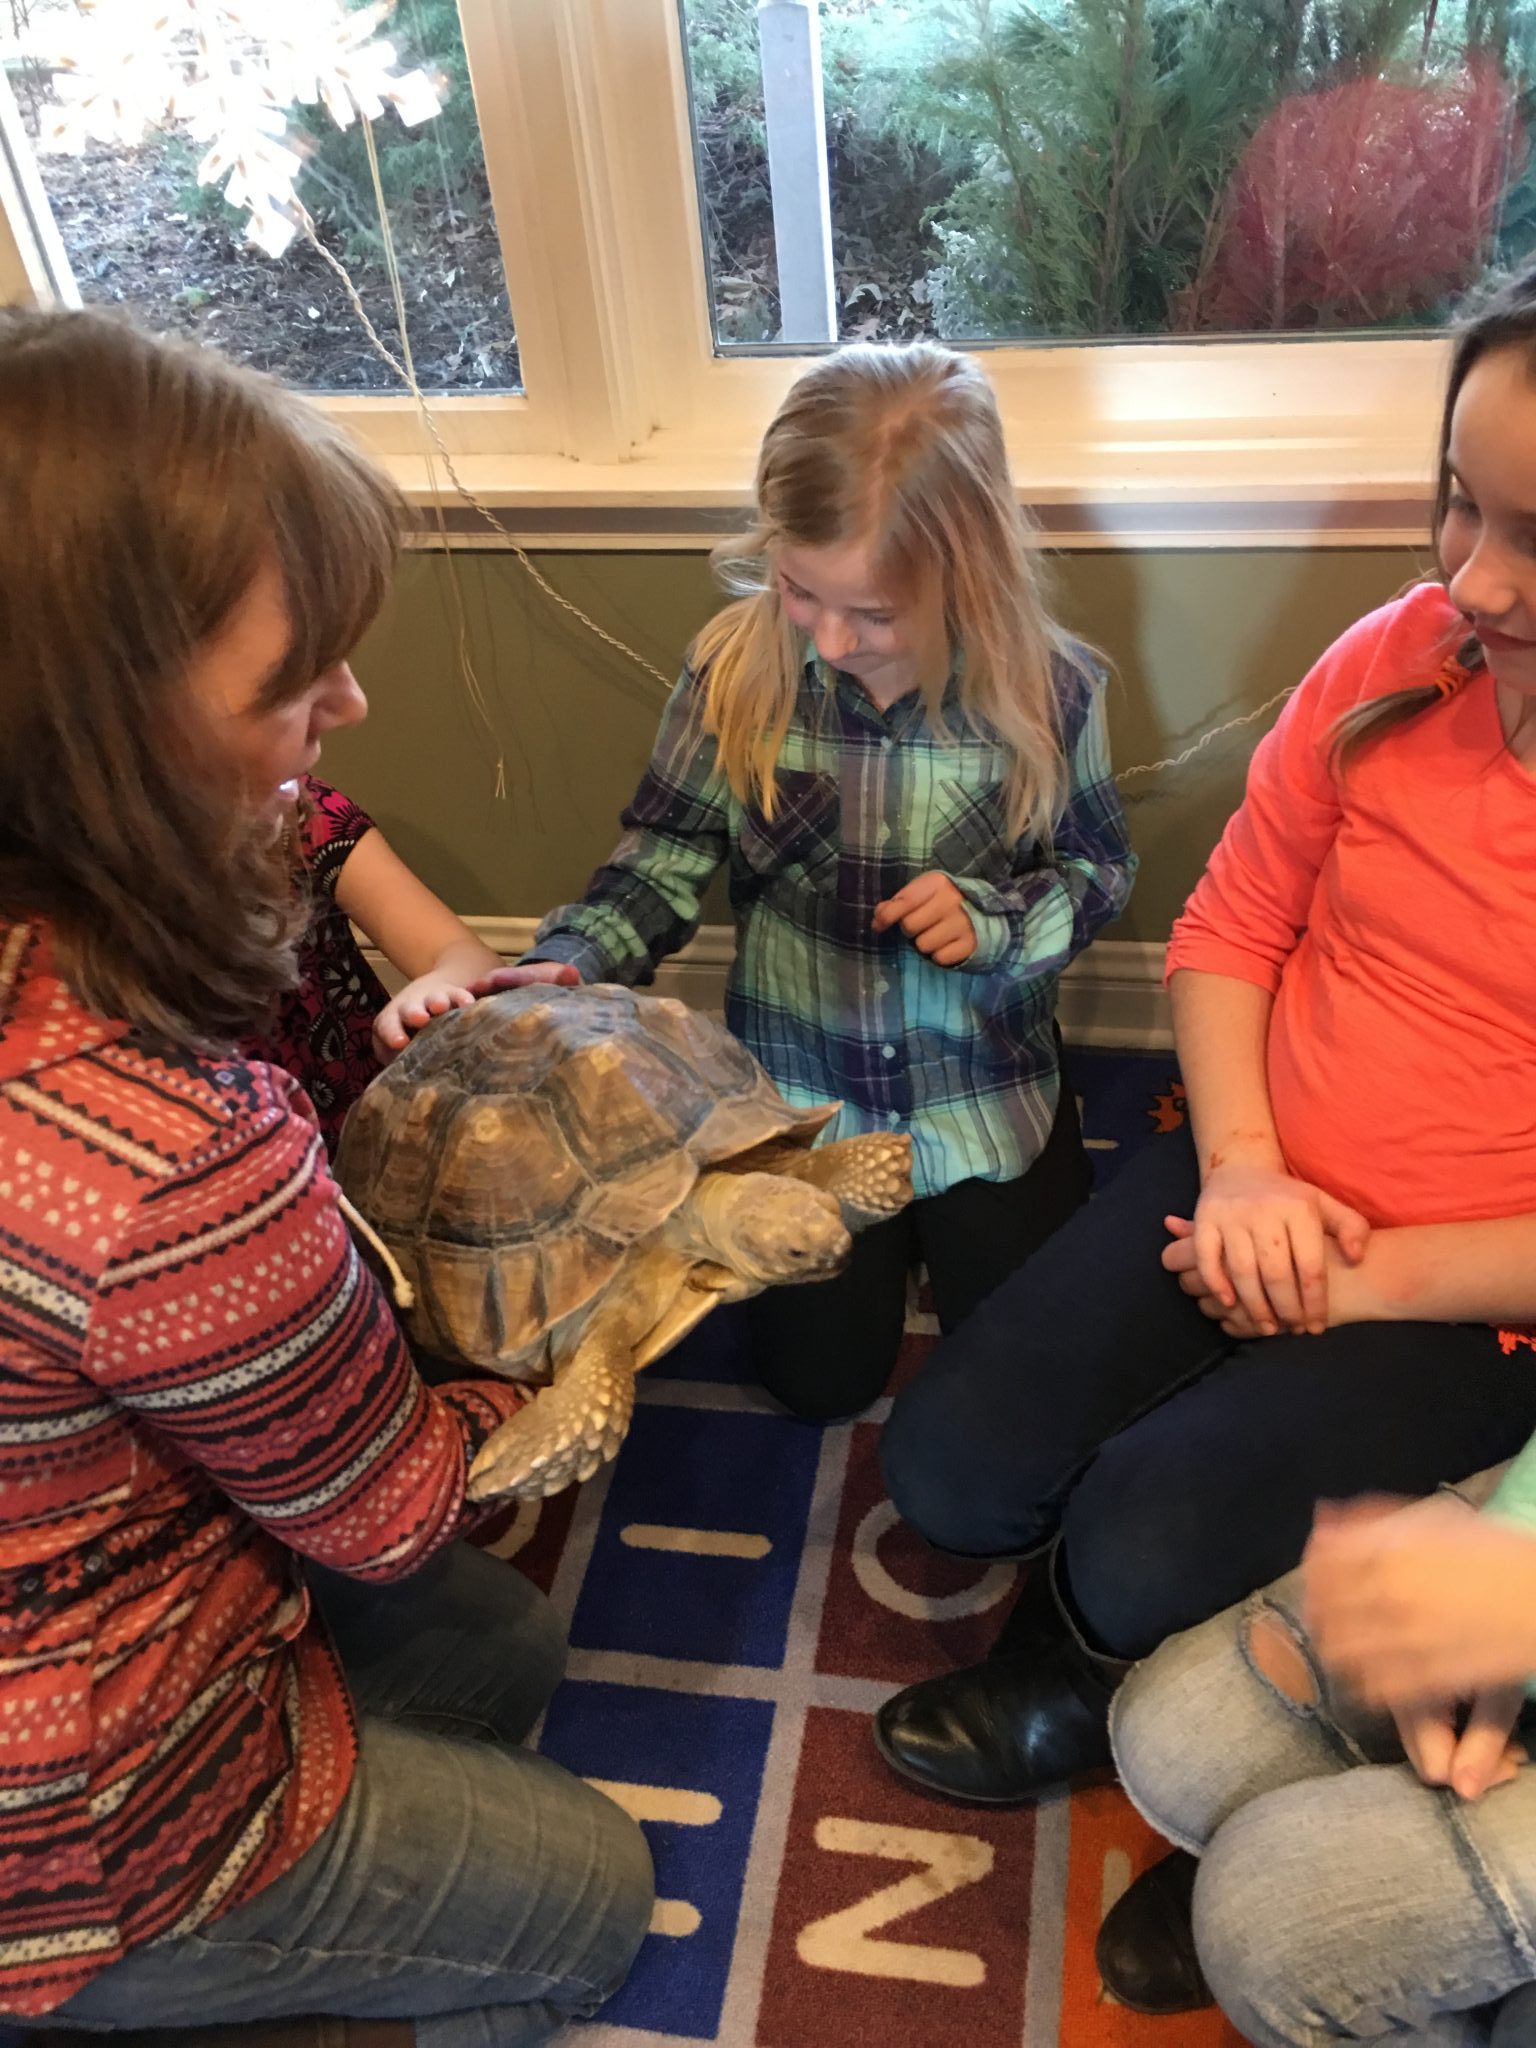 A young girl in a plaid shirt petting a turtle.